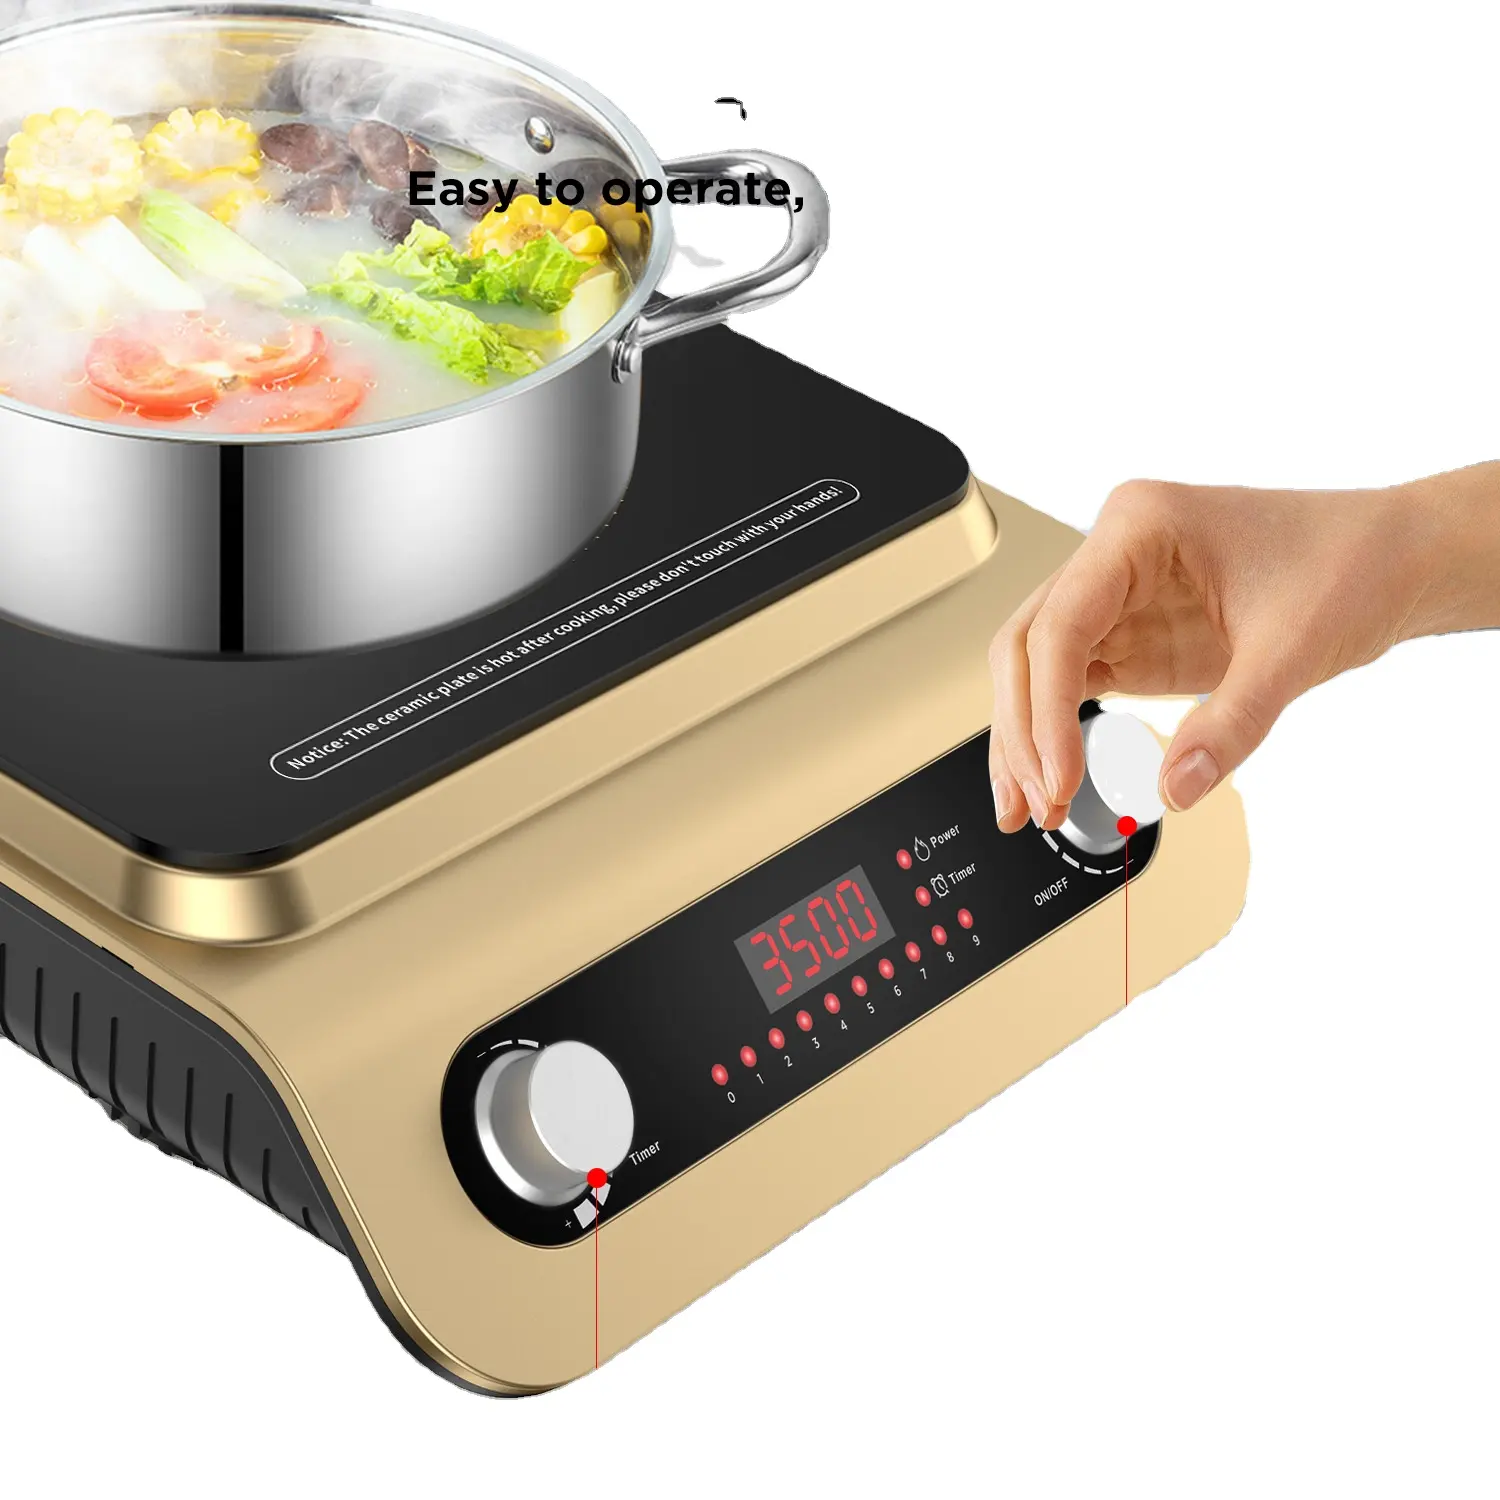 Infrared Electric Stove Supplier 2200W Portable Electric Stove 1 Burner Hot Plates Infrared Cooker